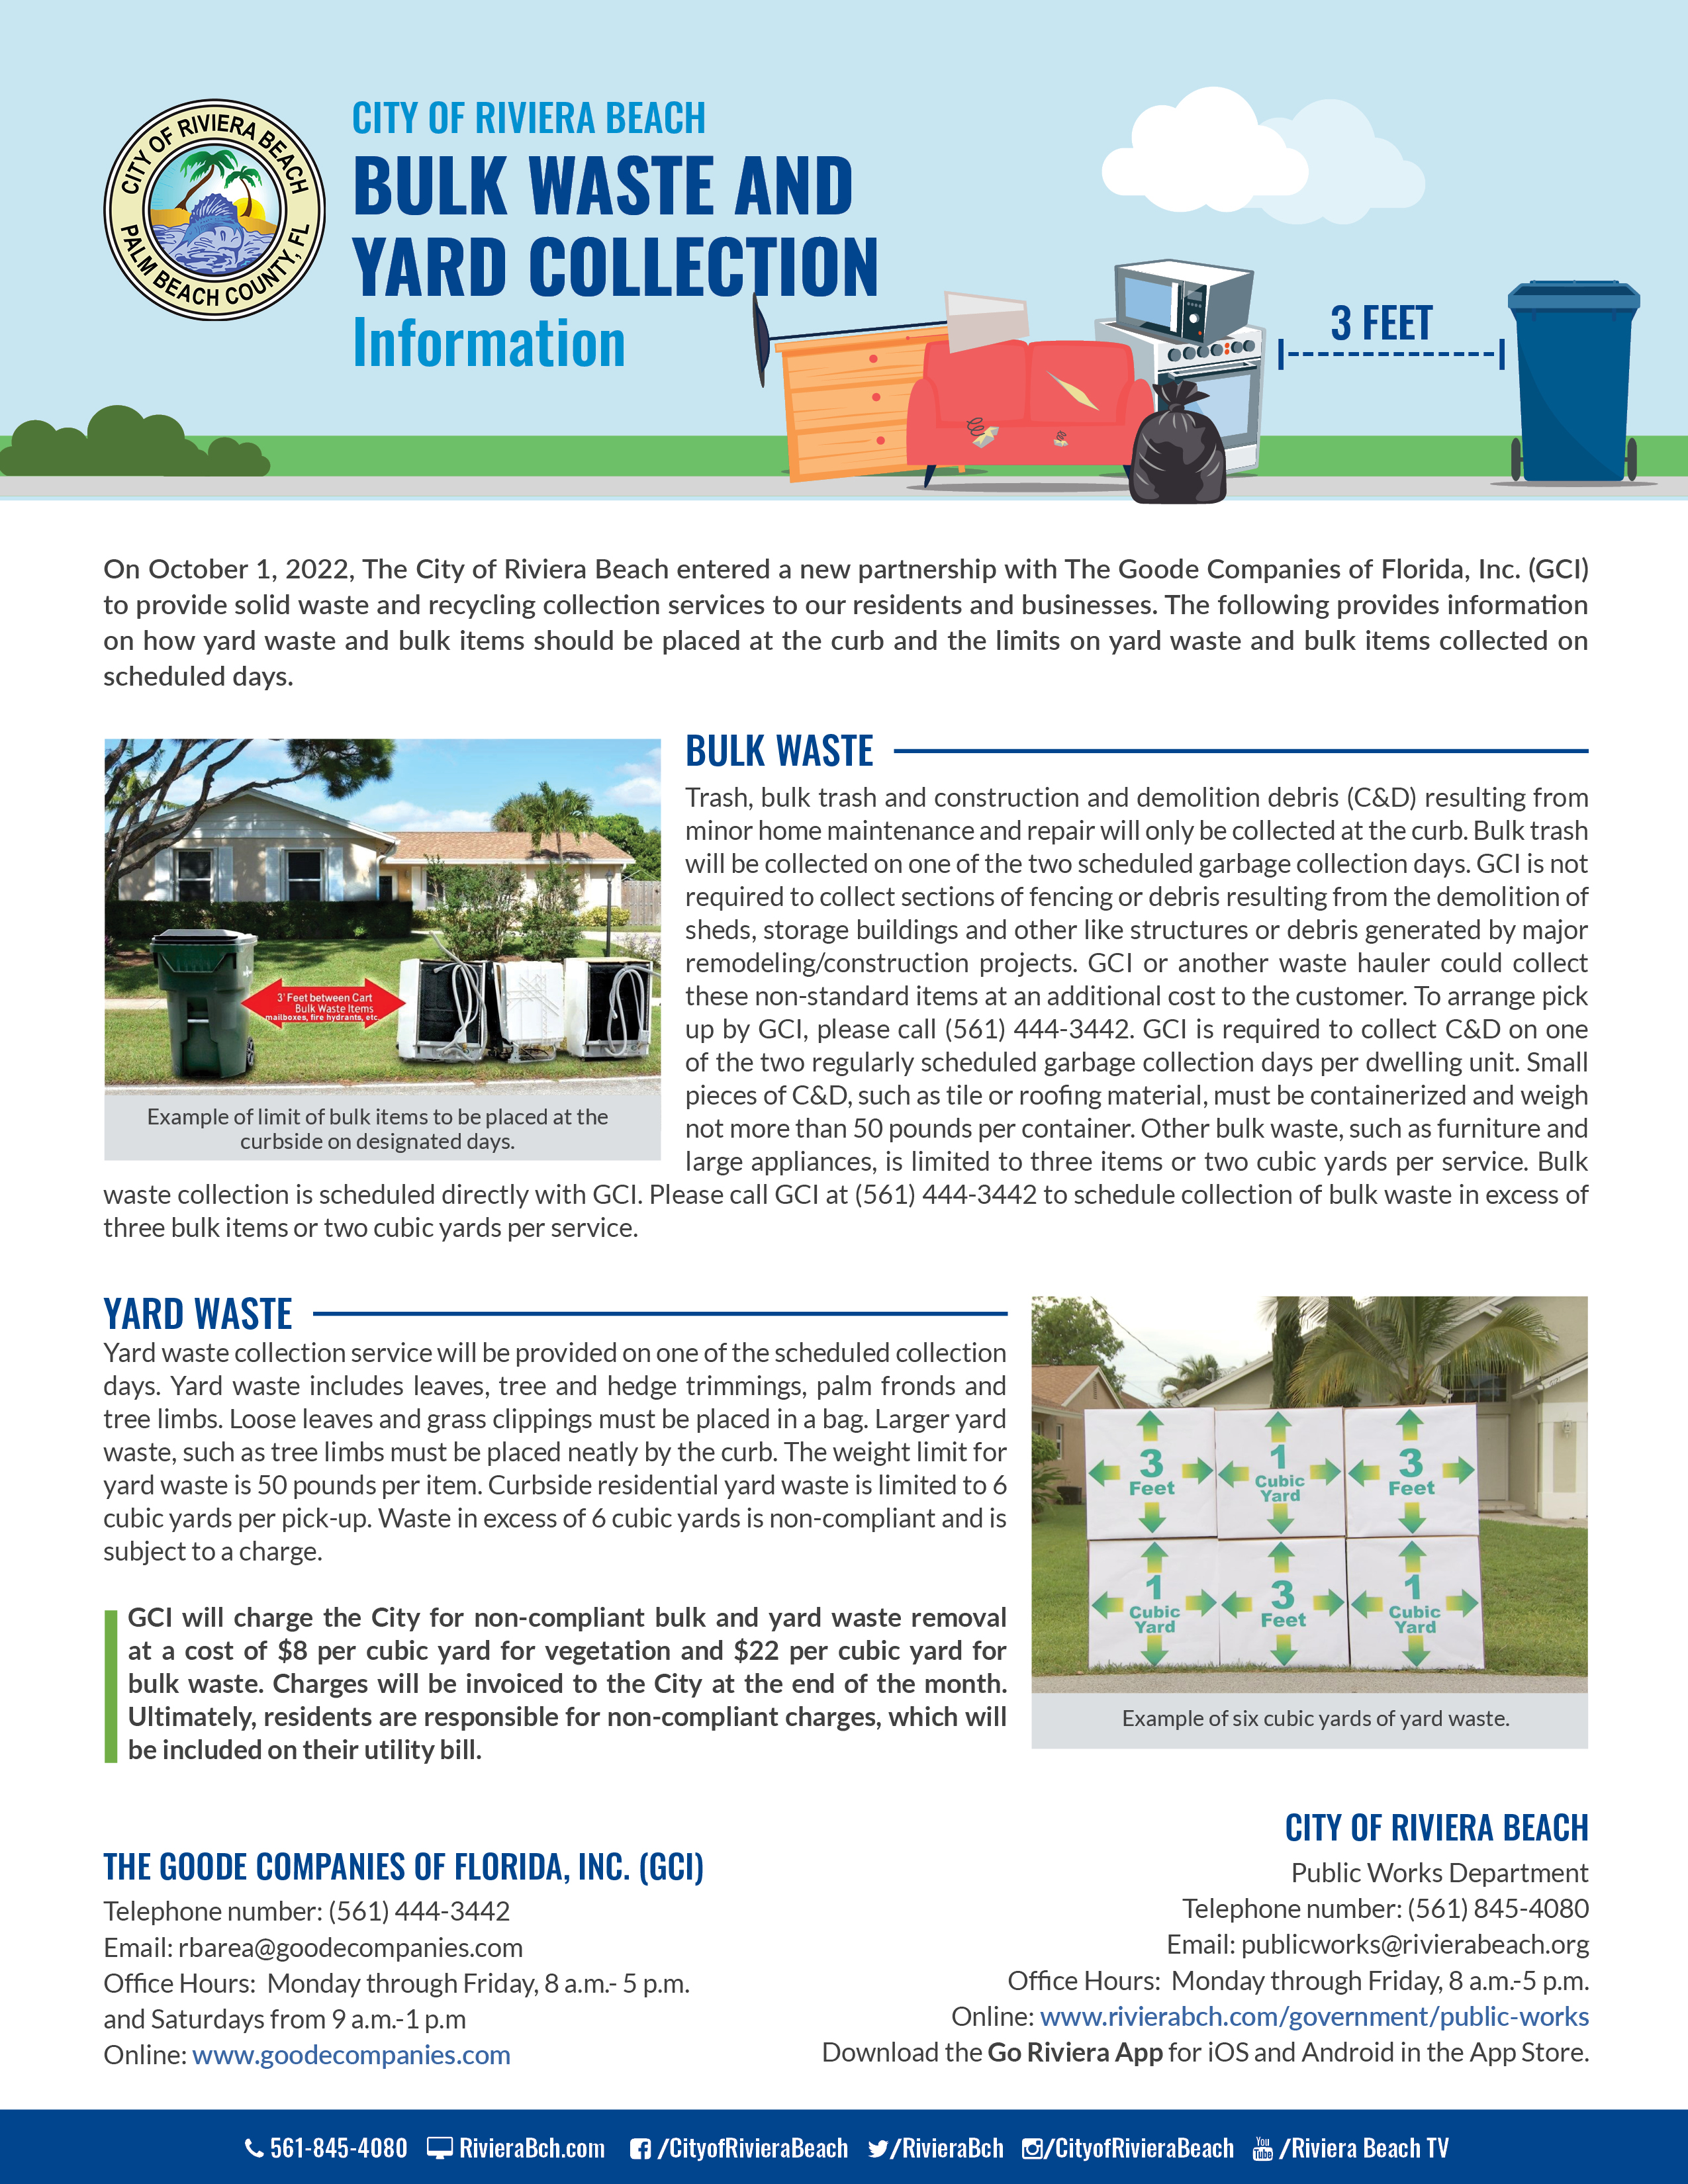 City of Riviera Beach Solid Waste and Recycling Collection Services  Frequently Asked Questions (FAQs)  The City of Riviera Beach (City) is pleased to announce its new partnership with The Goode Companies of Florida, Inc. (GCI) to provide solid waste and recycling collection services to our residents and businesses. The new service with GCI began on Saturday, October 1, 2022. Below are prevalent Frequently Asked Questions (FAQs) concerning the new service provider, garbage carts, rates, routes, standards and types of collectable waste and recycling items.   New Service Provider  Why is the City switching to a new solid waste and recycling collection service provider?    On November 16, 2011, the City of Riviera Beach entered into a ten-year agreement with Waste Management of Florida. On October 6, 2021, the agreement was extended to twelve months to allow for a new solicitation and procurement of a vendor. Upon completion of the solicitation process, the Goode Companies of Florida Inc. (GCI) was selected as the new solid waste and recycling collection service provider. In September 2022, the City and GCI entered into an agreement for GCI to commence services on October 1, 2022.     Who is the Goode Companies of Florida, Inc.?  GCI was founded in 1991 and established its Solid Waste Division to provide solid waste and recycling collection services for residential and commercial entities.   Rates  Will the trash collection charge be included on the City’s monthly utility bill? The solid waste collection and recycling charges will continue to be included on the customers’ monthly utility bills which are issued by the City.  Will the new waste service provider charge more to gated communities?  There is not an additional cost to gated communities.     Why is the new rate more than the current solid waste collection and recycling rate?   The higher rate of providing solid waste collection and recycling services is a result of the increased cost for labor, fuel and capital equipment.    Garbage Waste  What is considered garbage? Garbage is food waste and discarded or useless material.  Will the residential garbage carts be replaced? GCI will exchange the existing green colored garbage carts with brand new blue garbage carts over the next few months to residential customers. Continue to use the green carts until the exchanges are made. In the event that a new container is not provided by December 31, please contact the City's Public Works Department at (561) 845-4080 or GCI at (561) 444-3442.   What happens to the existing green garbage carts?   GCI should collect the old green colored carts no later than December 31.    May additional garbage carts be requested and if so, what is the cost?  The trash collection charge on utility bills provides for one garbage cart per residence. However, customers may request additional carts from GCI at a cost of $85 per cart. The cost of the additional cart will be included in the trash fee as depicted on the City’s monthly utility bill. Payments are accepted in the form of credit cards and money orders.  There is no limitation on the number of carts a customer can purchase. Please call GCI at (561) 444-3442 to order additional carts.  Why is there a cost for a new garbage cart?   The automated service requires the purchase of new garbage carts that are designed to complement the automated collection equipment. The automated collection equipment is calibrated to the exact specifications of the new carts.   Must the assigned garbage cart be left at the respective property when a household moves out of a residence?  The assigned garbage carts are to remain at the original property and be safely stored in a secure place for the new household.  Each cart is uniquely numbered and the respective number is assigned to a specific property.   What if a garbage cart is broken or stolen? If the collection truck causes the damage or if the damage is a result of normal wear, the impaired cart will be replaced or repaired at no cost. Damage resulting from negligence or misuse will be the responsibility of the resident. Stolen carts will be replaced at no charge to the customer.  What are the guidelines for garbage that is considered appropriate for collecting? Garbage waste must be placed inside the garbage cart provided by GCI. Garbage bags and other garbage debris that are placed outside the garbage cart will not be collected.  What time should garbage carts be placed curbside for garbage collection service?   Curbside residential solid waste collection service will be provided between the hours of 6 a.m. and 5 p.m., Monday through Friday, and on Saturdays from 6:00 a.m. to 3:00 p.m. except for holidays. Dwelling units receiving containerized residential solid waste collection service and non residential collection sites located within 150 yards of residential uses will only be collected between the hours of 7 a.m. and 5 p.m., Monday through Saturday. Other non-residential locations may be collected at any time. The hours of collection may be extended due to extraordinary circumstances or conditions.  Where must garbage carts be placed for collection service? Proper placement of carts is curbside at a safe distance of at least 4 to 6 feet away from any plantings, fencing, mailboxes or vehicles, with the front of the cart facing the street.   How often will garbage be collected? Curbside residential garbage collection service will remain at two days per week. Yard and bulk waste, and recyclables will be collected once per week on one of the two scheduled collection days.   Will garbage collection routes change? Presently, routes will remain the same. If routes are changed, new route information will be provided with advance notice.  Any new route changes will be effective after November 30.    Recycling Waste   What is the collection schedule for recycling? The current recycling collection schedule will remain the same.  This means that curbside recycling collection will be provided once per week on either of the two regularly scheduled garbage collection days.  Any schedule change(s) to this particular service will not take effect until after November 30 and customers will be notified in advance.   Will recycling bins be provided? Please use your current recycling bins. If a household needs more than one recycle bin, please contact GCI at (561) 444-3442 or the Solid Waste Authority at (561) 640-4000 to order additional bins at no charge.   Bulk and Yard Waste and Construction and Demolition Debris (C&D)  How often will bulk and yard waste and construction and demolition debris be collected?  Bulk and yard waste will be collected on one of the two regularly scheduled garbage collection days.   What yard waste collection services does GCI provide? Yard waste includes leaves, tree and hedge trimmings, palm fronds and tree limbs. Loose leaves and grass clippings must be placed in a bag. Larger yard waste such as tree limbs must be placed neatly by the curb. Any schedule change(s) to yard waste collection service will be communicated to customers through advance notice.  Any such changes will not take effect until after November 30.  What is the limit for bulk waste and construction and demolition debris (C&D) collection?  Bulk waste and construction and demolition debris (C&D) resulting from minor home maintenance and repair will only be collected at the curbside.  Small pieces of C&D, such as tile or roofing material, will be containerized and weigh no more than 50 pounds per container. Bulk waste does not have a weight limit, but is limited to three bulk items or two cubic yards per service. GCI is not required to collect sections of fencing or debris resulting from the demolition of sheds, storage buildings and other like structures or debris generated by major remodeling/construction projects. GCI or another waste hauler could collect sections of fencing or debris resulting from the demolition of sheds, storage buildings and other like structures or debris generated by major remodeling/construction projects at an additional cost to the customer. To arrange pick up by GCI, please call (561) 444-3442.  How is excessive bulk waste collection scheduled? Bulk waste collection in excess of 6 cubic yards must be scheduled for pick up directly with GCI by contacting them at (561) 444-3442 to request the service.   How much yard waste can be collected on the scheduled waste collection day? Curbside residential yard waste is limited to 6 cubic yards per pick-up. Waste in excess of 6 cubic yards is non-compliant and is subject to charge. The weight limit for yard waste is 50 pounds.  GCI will charge the City for non-compliant bulk and yard waste removal at a cost of $8 per cubic yard for vegetation and $22 per cubic yard for bulk waste. Charges will be invoiced to the City at the end of the month. Residents ultimately will be responsible for noncompliant charges, which will be included on their utility bill from the City.   Hazardous Material  What kind of hazardous waste is unacceptable? Items such as tires, paint and glass are unacceptable for collection and will not be picked up by GCI.   For a list of drop off locations for these items, please visit: https://www.swa.org/172/Drop-Off-Locations.  General  Did the City consider creating its own solid waste collection service?  Establishing a solid waste collection service requires a significant capital investment.    How are missed collections reported?    In the event there is a missed pick up of curbside residential or commercial waste, please use the City’s digital service ticketing system at https://www.rivierabch.com/311/request/add and select the option for missed trash pickup or call the City’s Public Works Department at (561) 845-4080.  How is waste collection provided to persons with disabilities? Services can be arranged for elderly residents and individuals with disabilities that prevent a customer from safely rolling a cart to and from the curb. GCI will collect carts from residents’ garage doors or backdoors and return the carts after service. Please call GCI at (561) 444-3442 to make arrangements.  What happens if the scheduled solid waste collection days fall on a holiday?   Residential collection services are not offered on the following holidays in observance of Thanksgiving, Christmas Day and New Year’s Day.   Collection services will resume on the next scheduled service day.  Customer Service and Relations  City info will be listed  City of Riviera Beach Public Works Department Telephone number: (561) 845-4080 Email: publicworks@rivierabeach.org  Office Hours:  Monday through Friday, 8 a.m. – 5 p.m.  Online: https://www.rivierabch.com/government/public-works Download the Go Riviera App for iOS and Android in the App Store  The Goode Companies of Florida, Inc. (GCI)  Telephone number: (561) 444-3442 Email: rbarea@goodecompanies.com Office Hours:  Monday through Friday, 8 a.m.- 5 p.m. and Saturdays from 9 a.m. – 1 p.m.  Online: www.goodecompanies.com